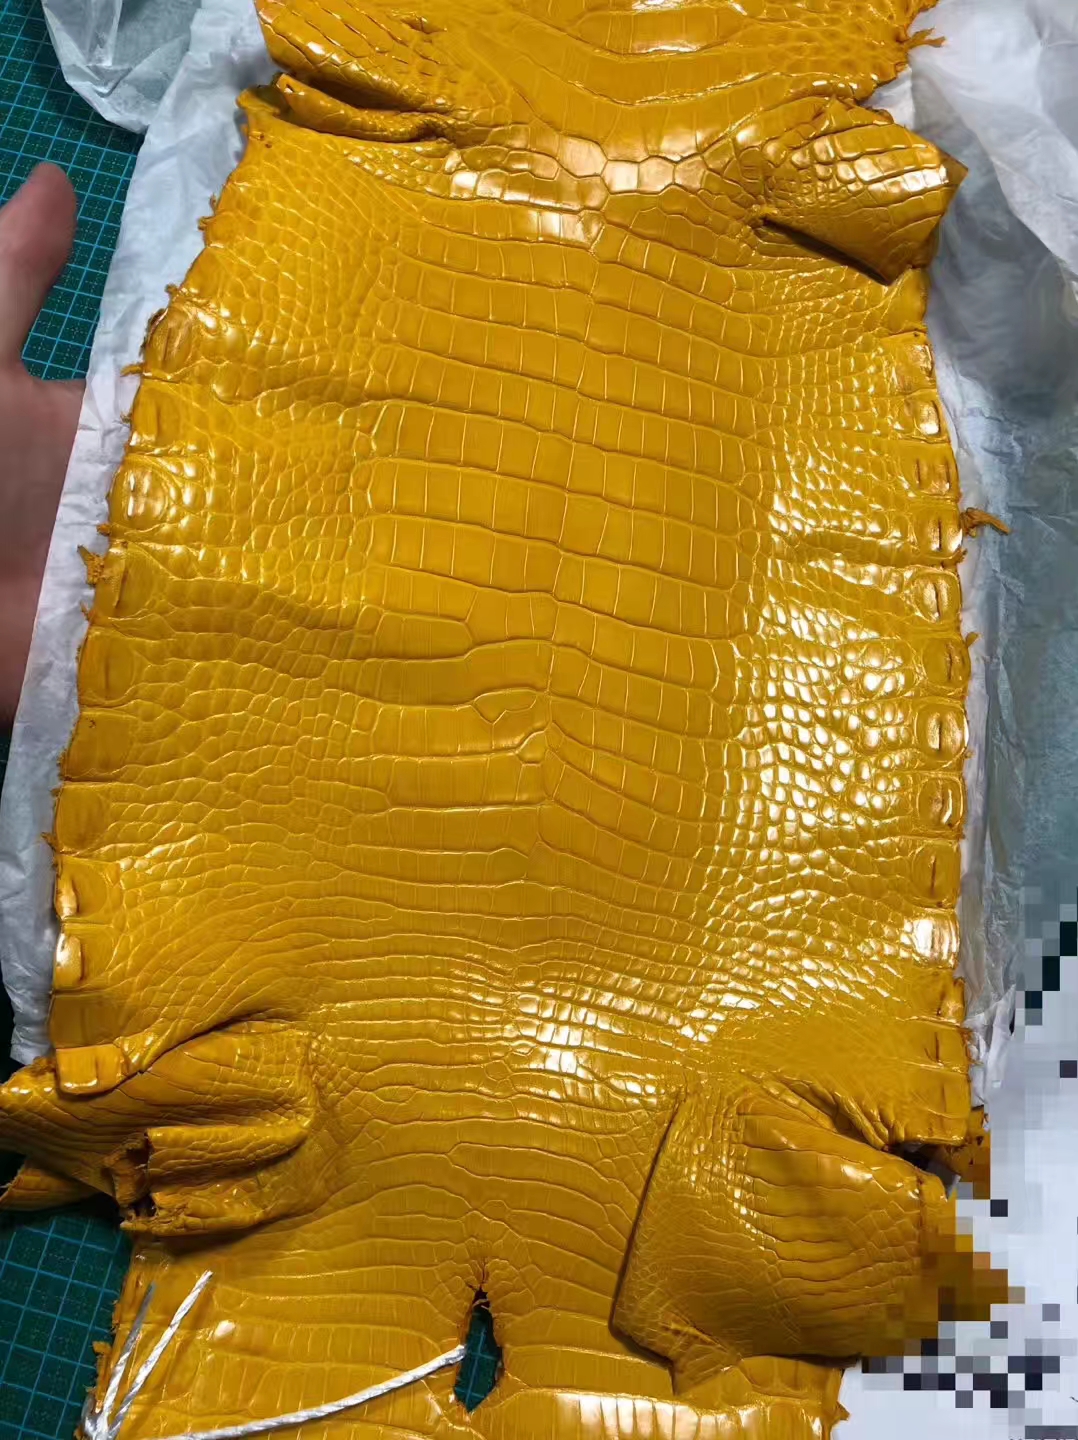 New Arrival Hermes Alligator Shiny Crocodile Leather in 9D Ambre Yellow